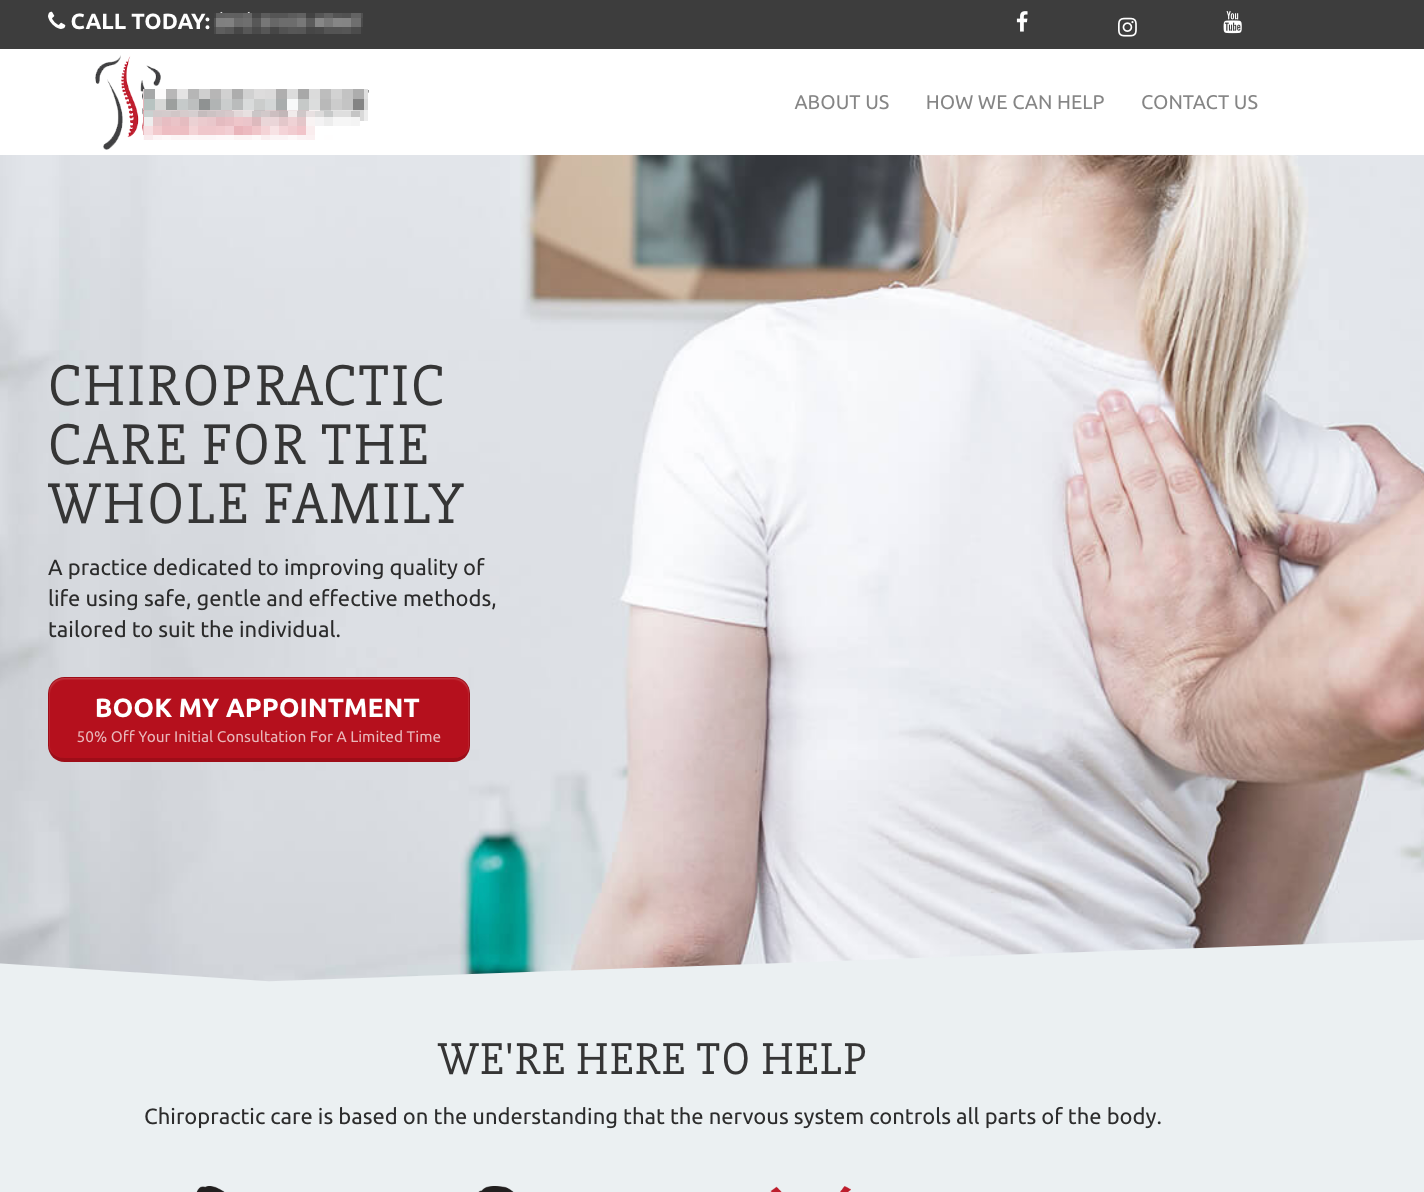 image of a women getting her back adjusted by a chiropractor